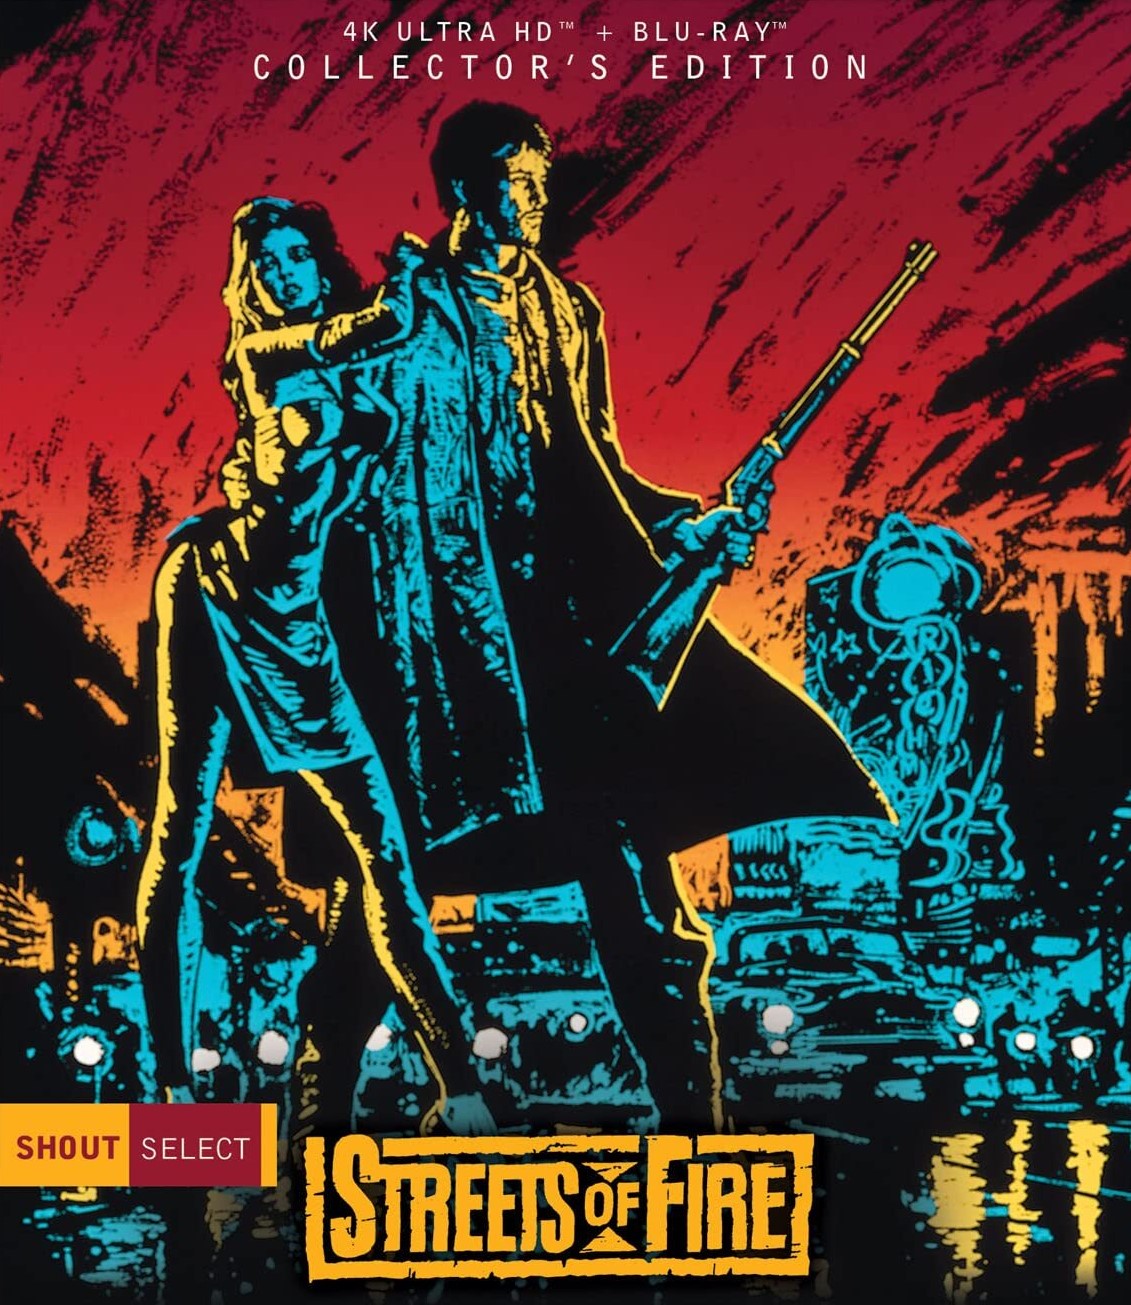 STREETS OF FIRE (COLLECTOR'S EDITION) 4K UHD/BLU-RAY